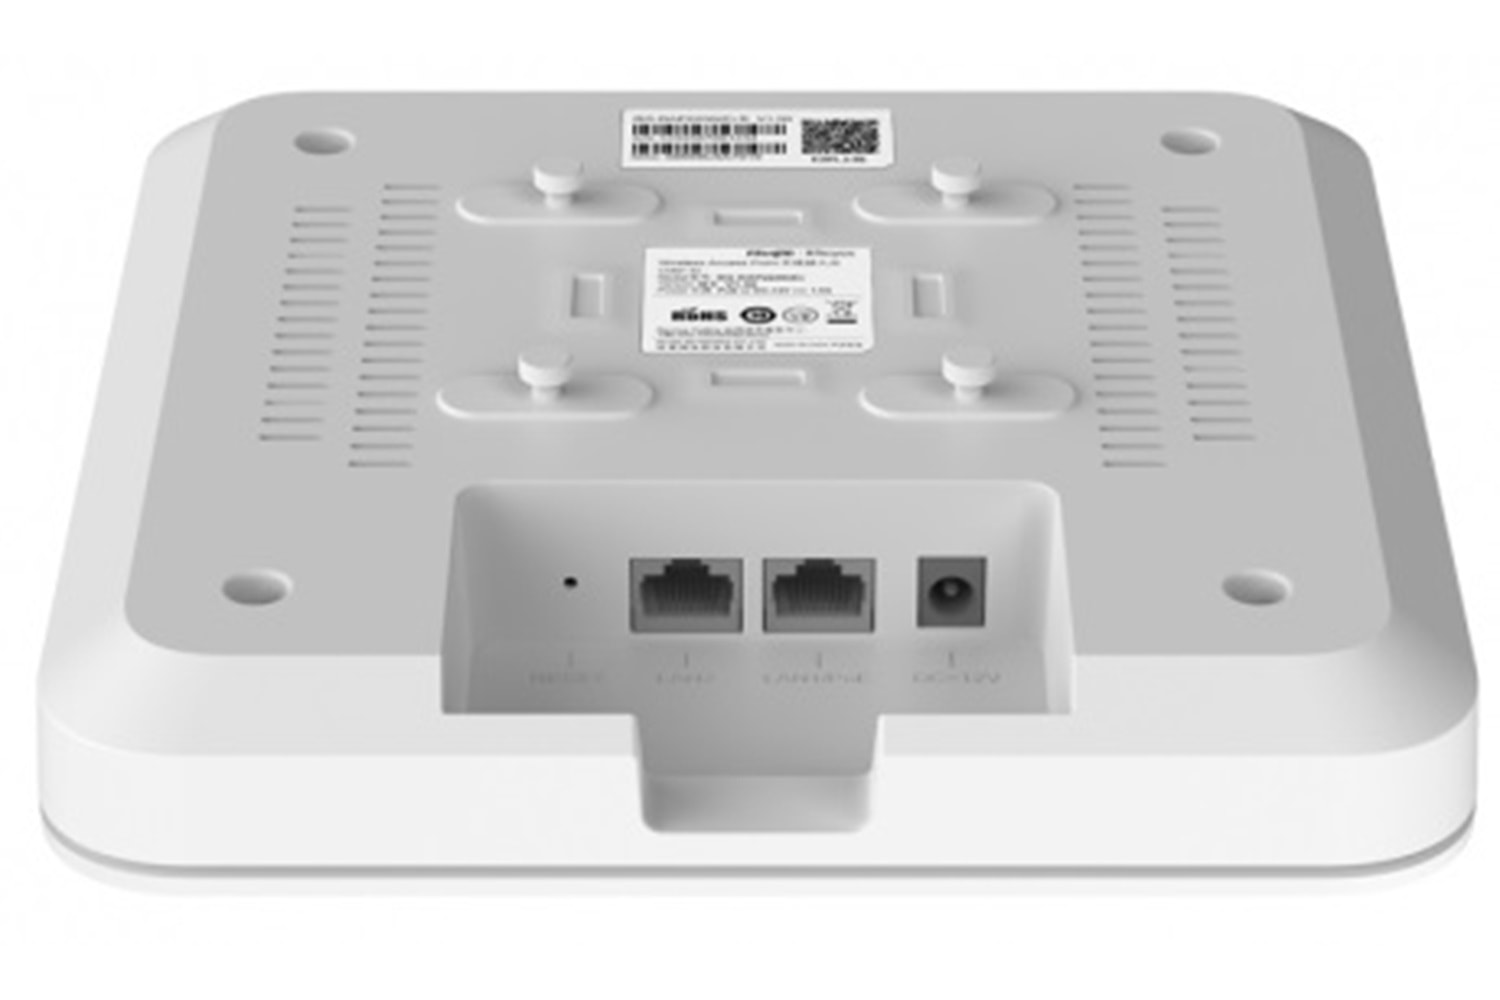 Ruijie Reyee RG-RAP2200(F) AC1300 2.4 - 5 Ghz 1300 Mbps Dual Band Access Point